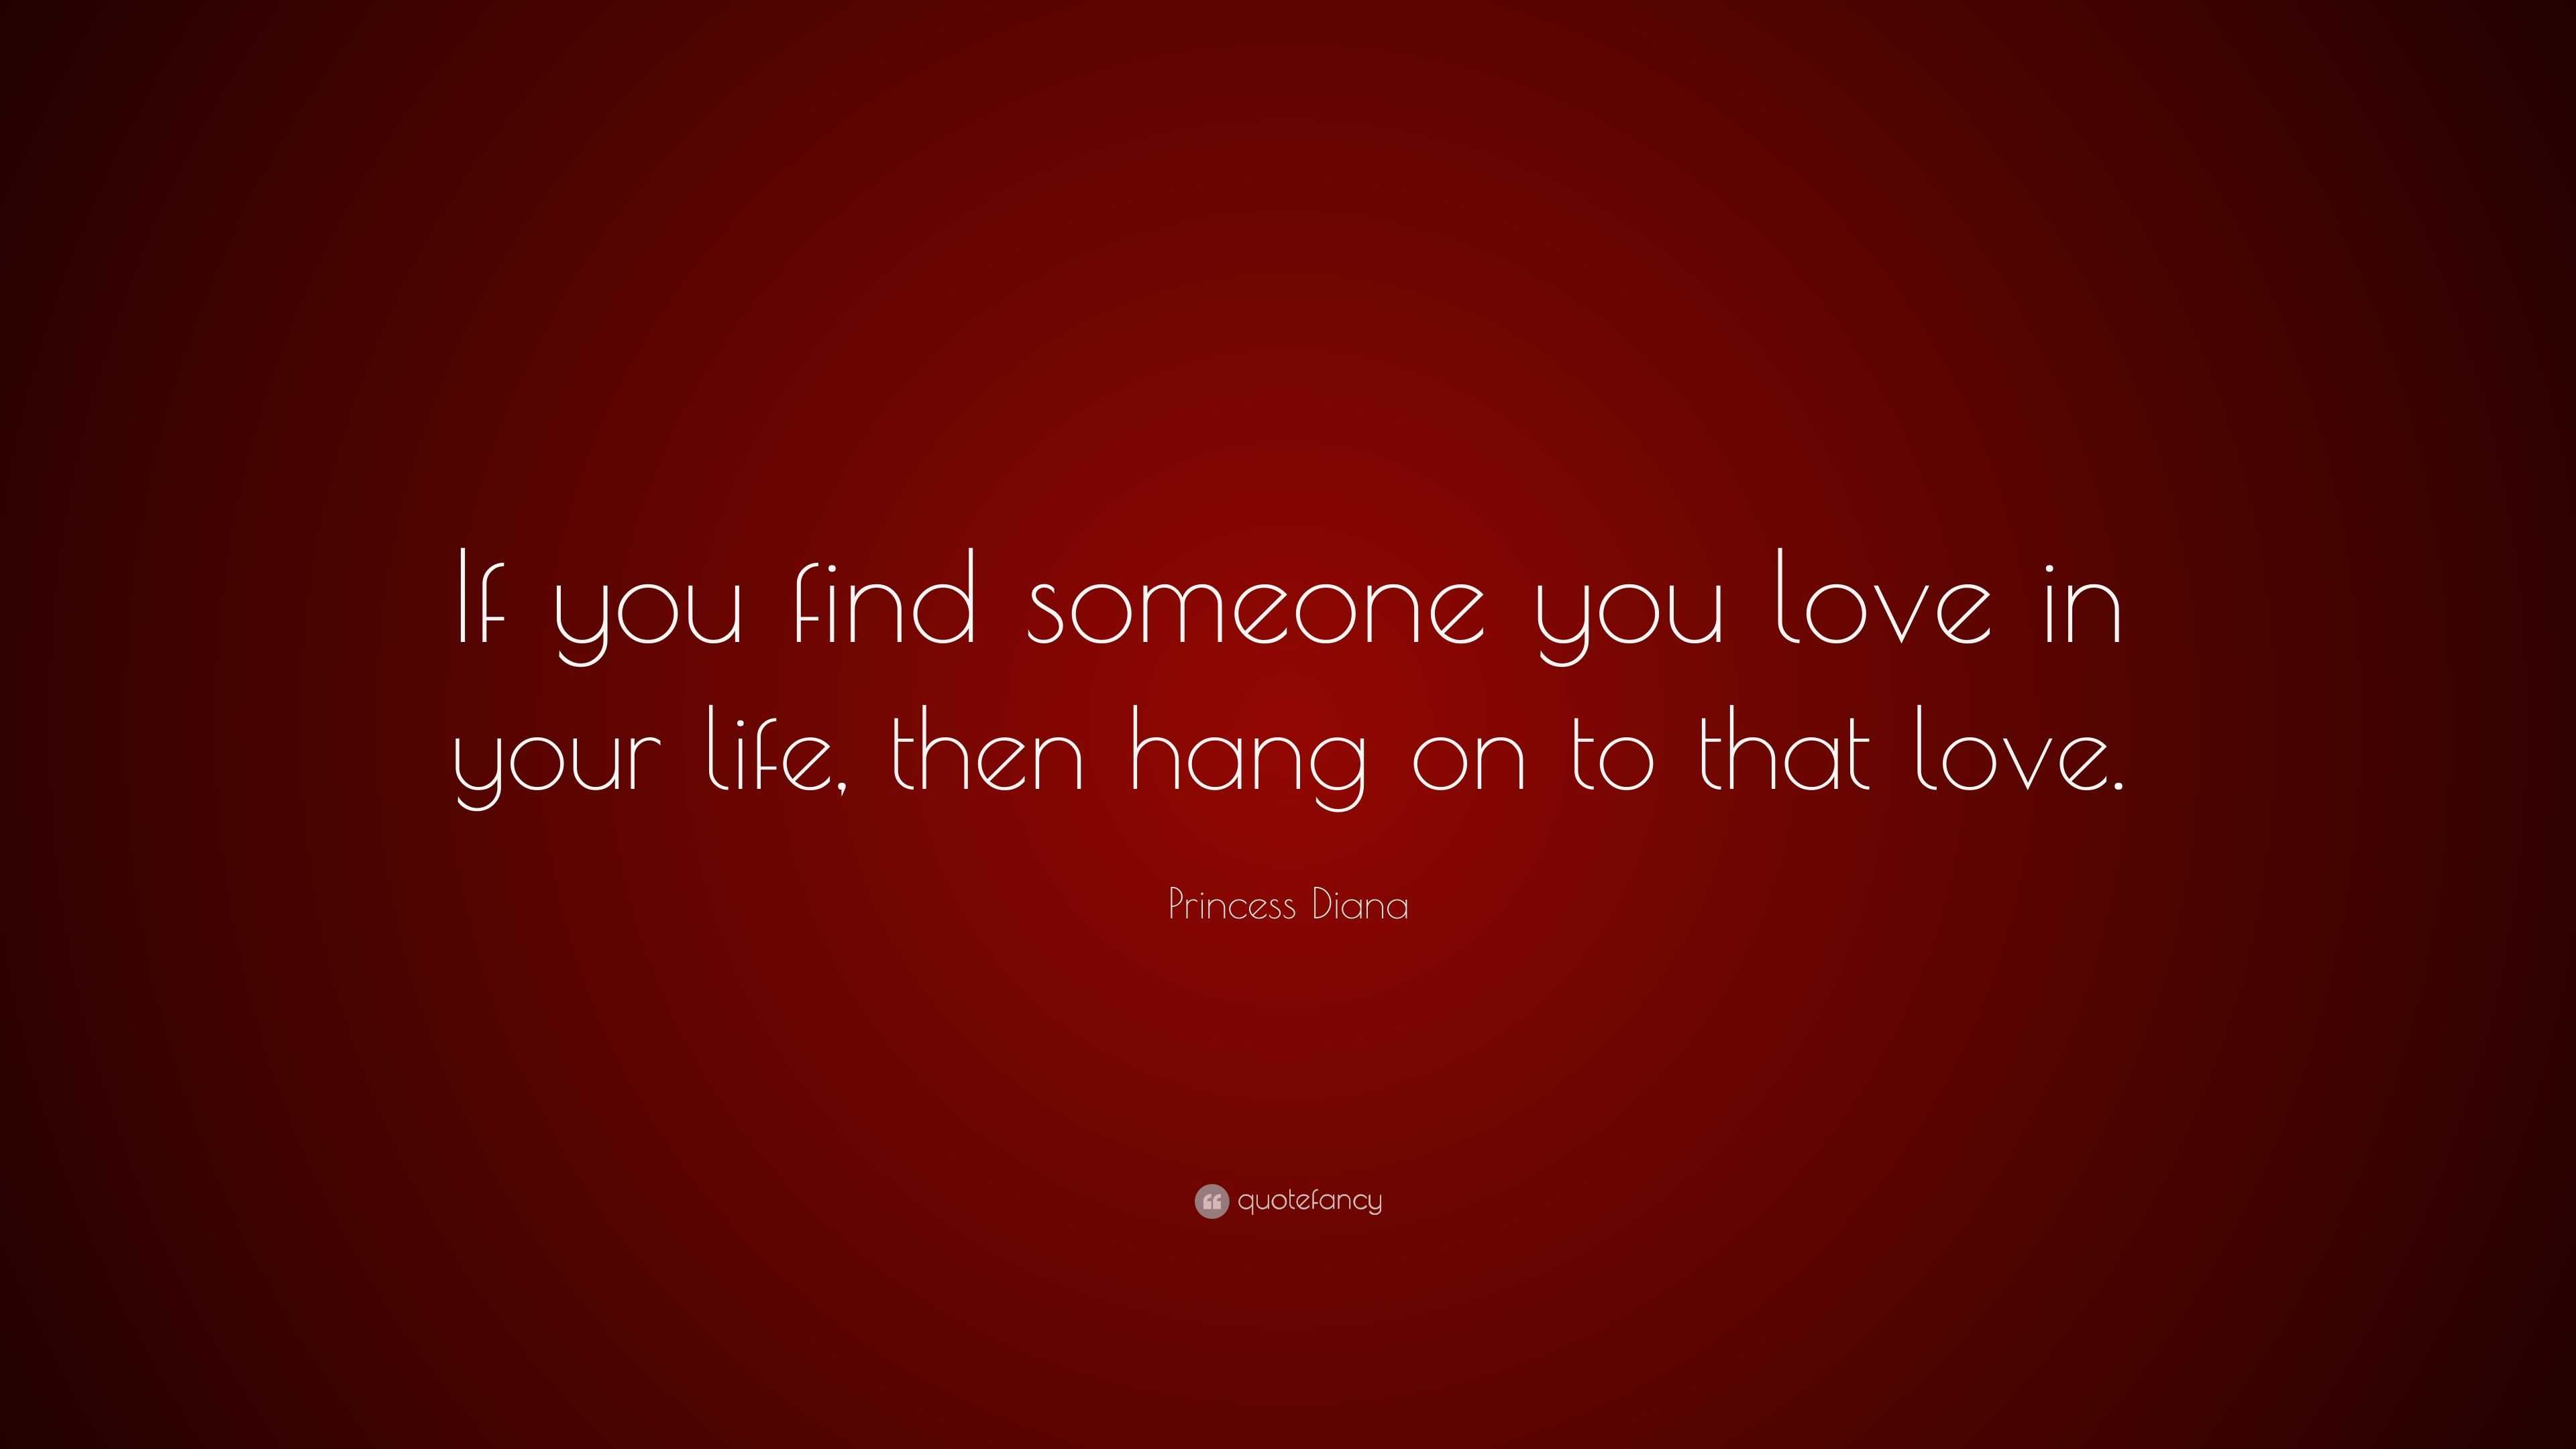 Princess Diana Quote “If you find someone you love in your life then